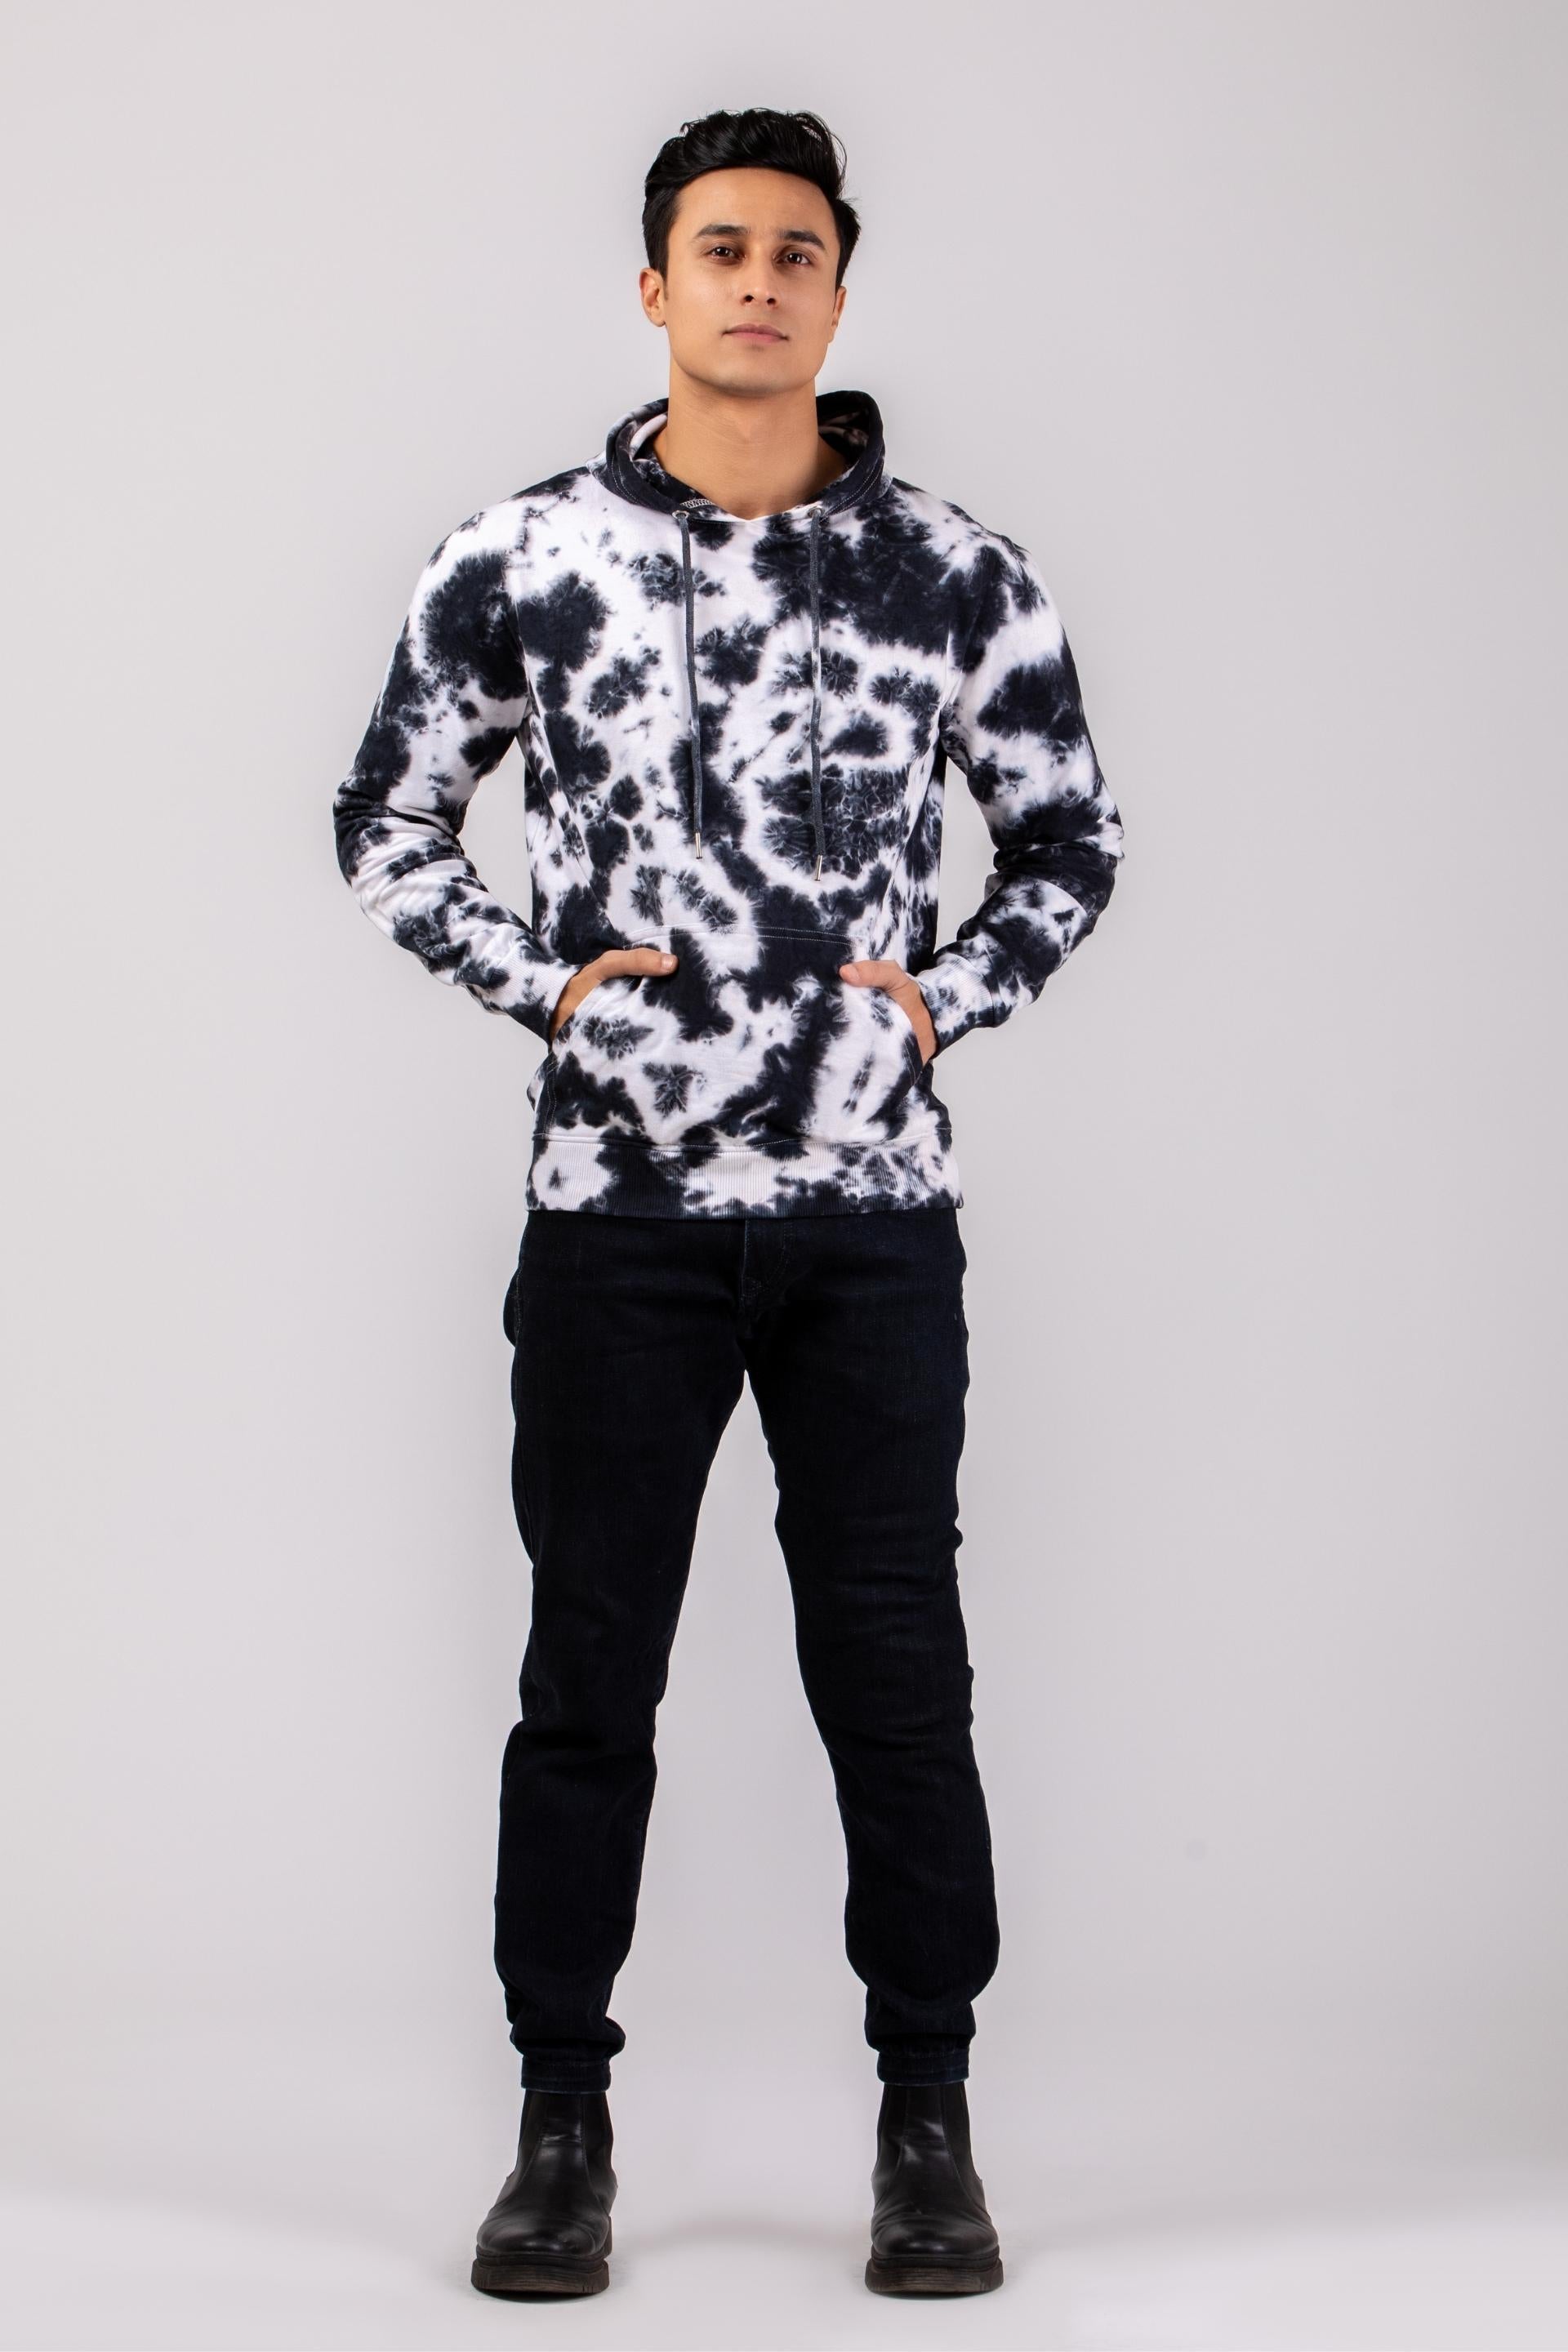 Firangi Yarn Super Soft Cotton Tie&Dye Black and White Ombre Hoodie With Kangaroo Pockets